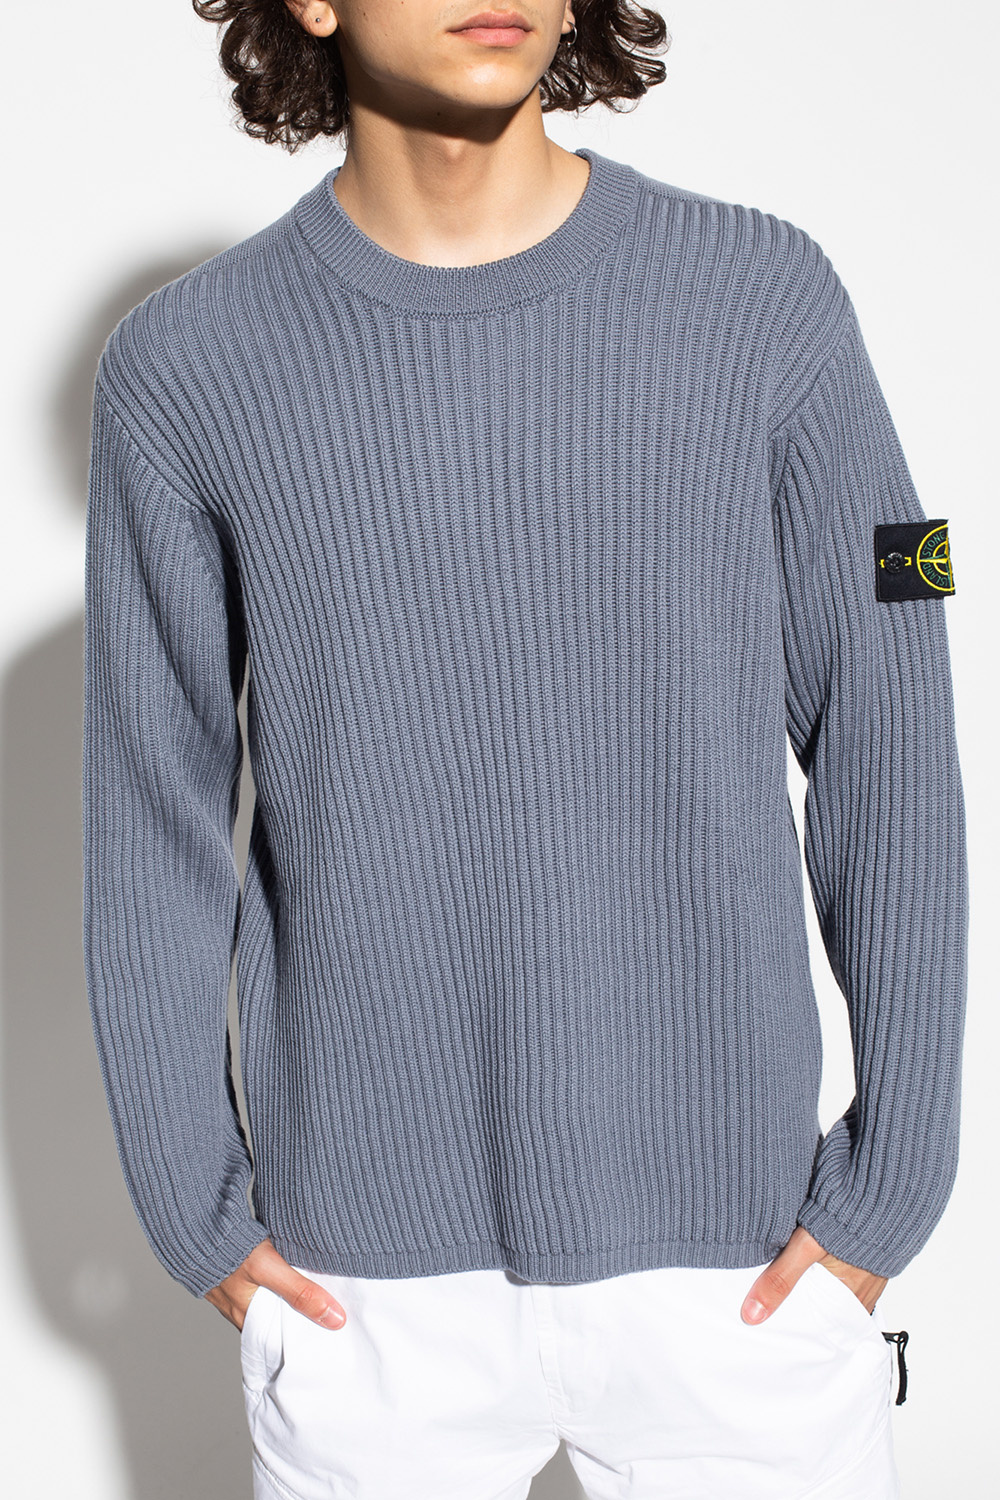 Stone Island Knitted sweater | Men's Clothing | IetpShops